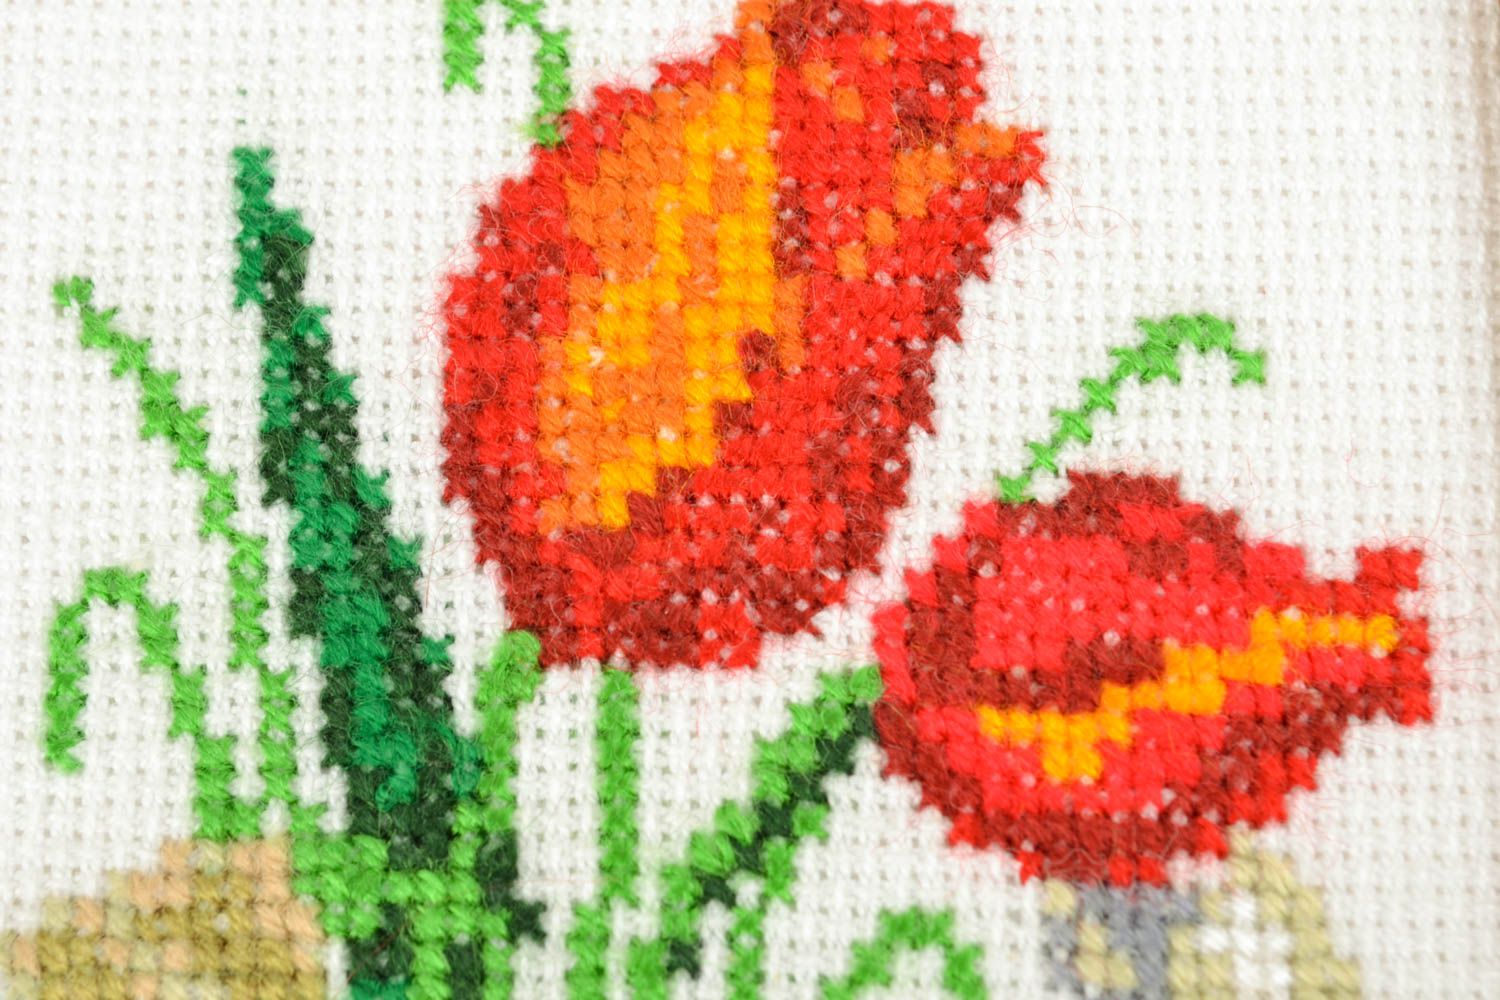 Handmade cross stitched picture photo 1